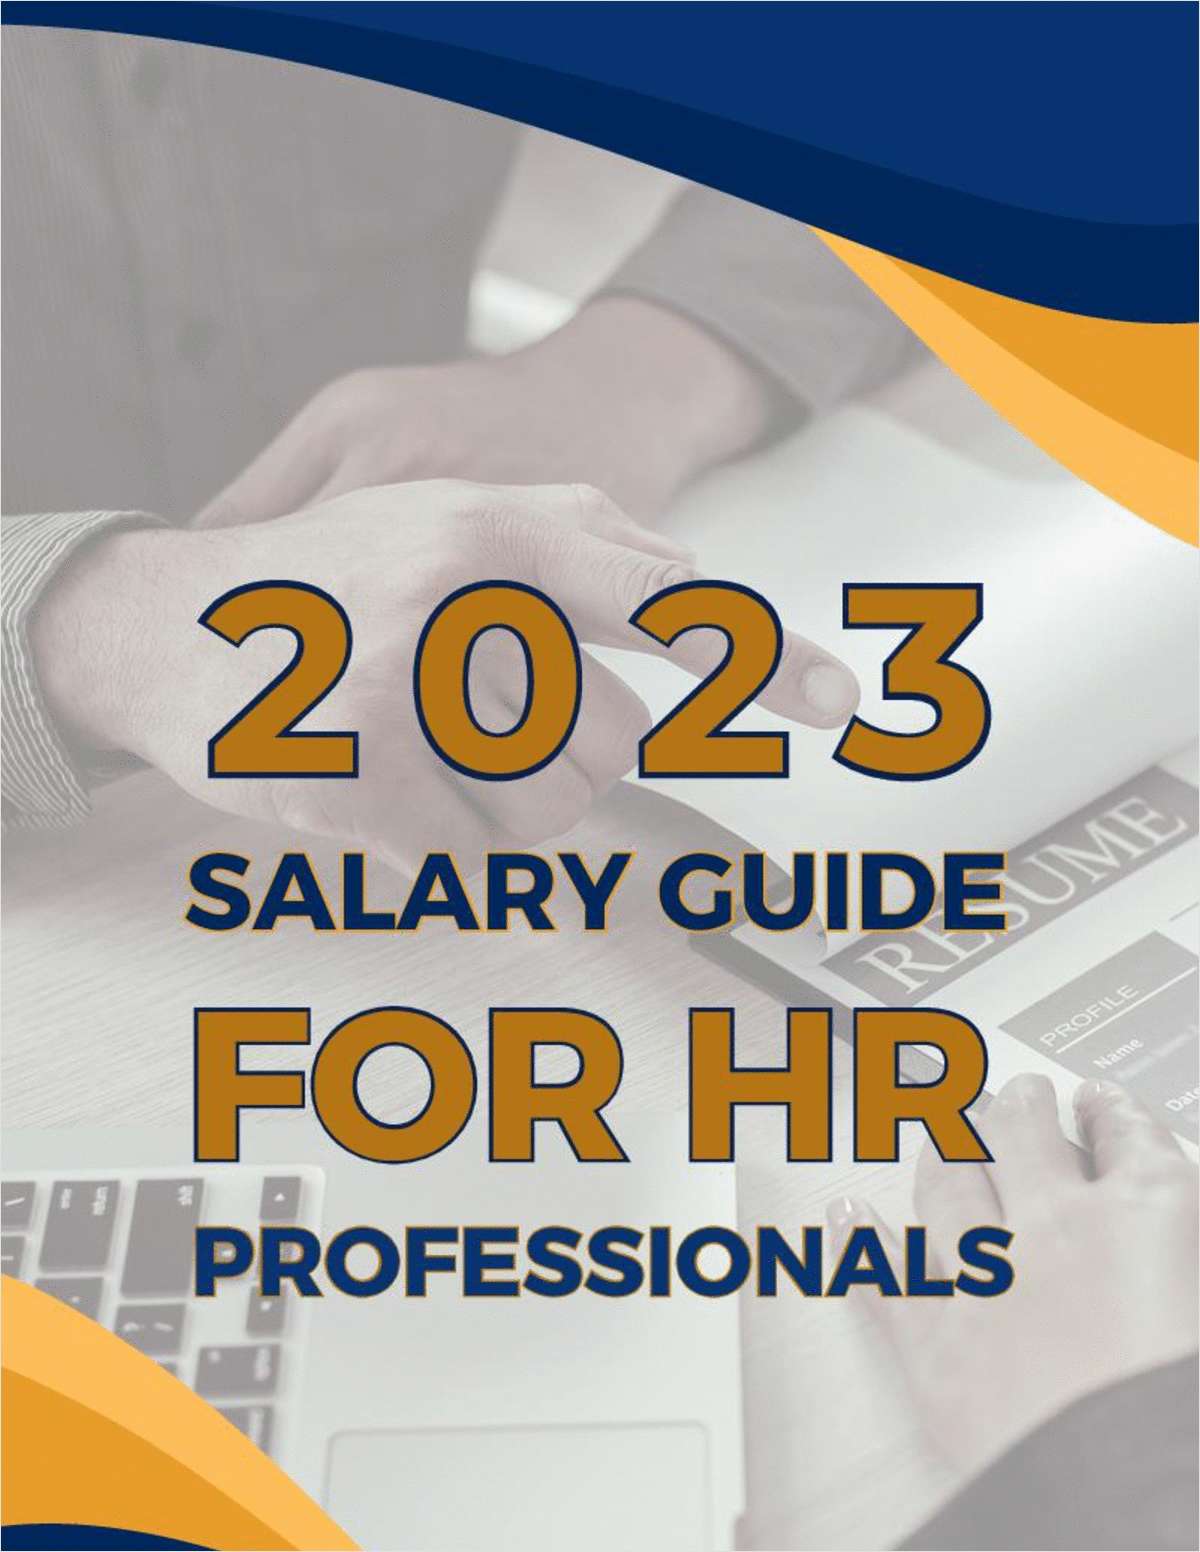 2023 Salary Guide for HR Professionals